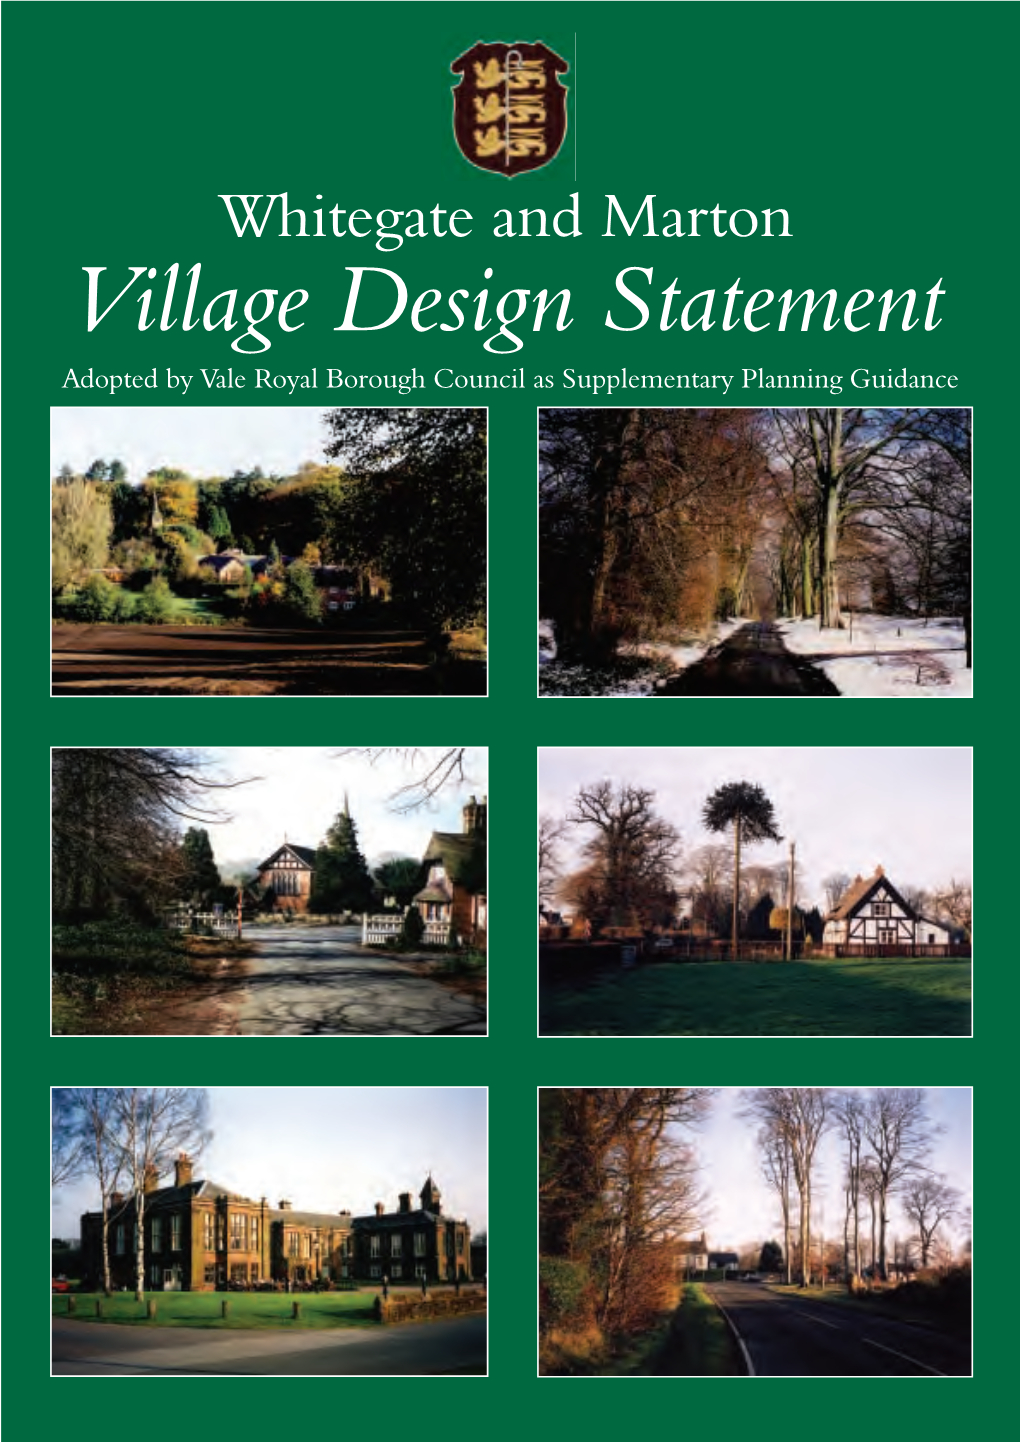 Whitegate and Marton Village Design Statement Adopted by Vale Royal Borough Council As Supplementary Planning Guidance Whitegate and Marton Village Design Statement